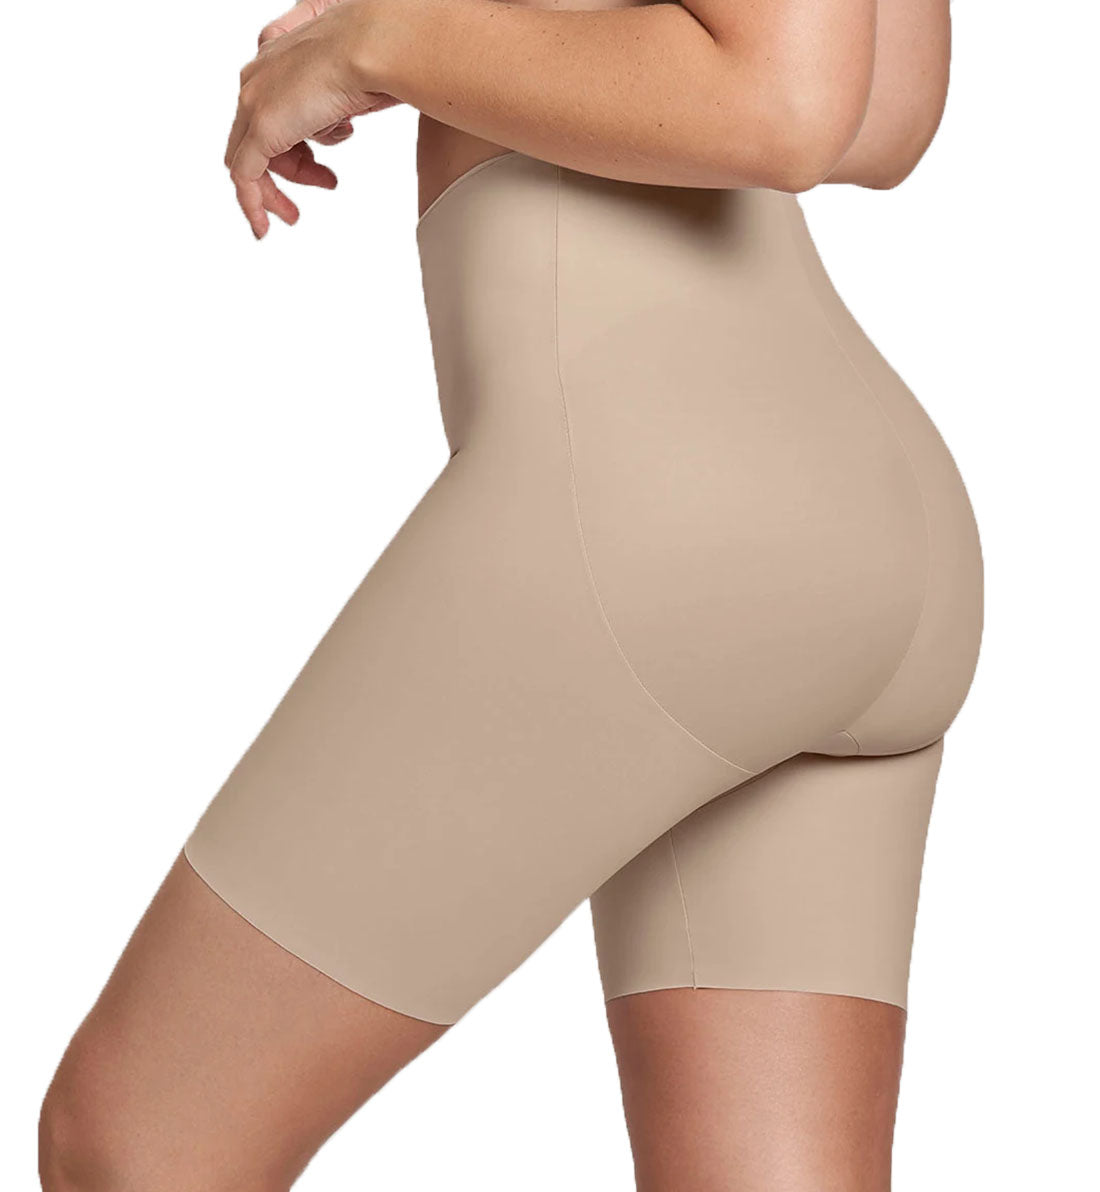 Leonisa Midrise Anti Chafing Butt Lifter Shaper Short (012992),Small,Nude - Nude,Small